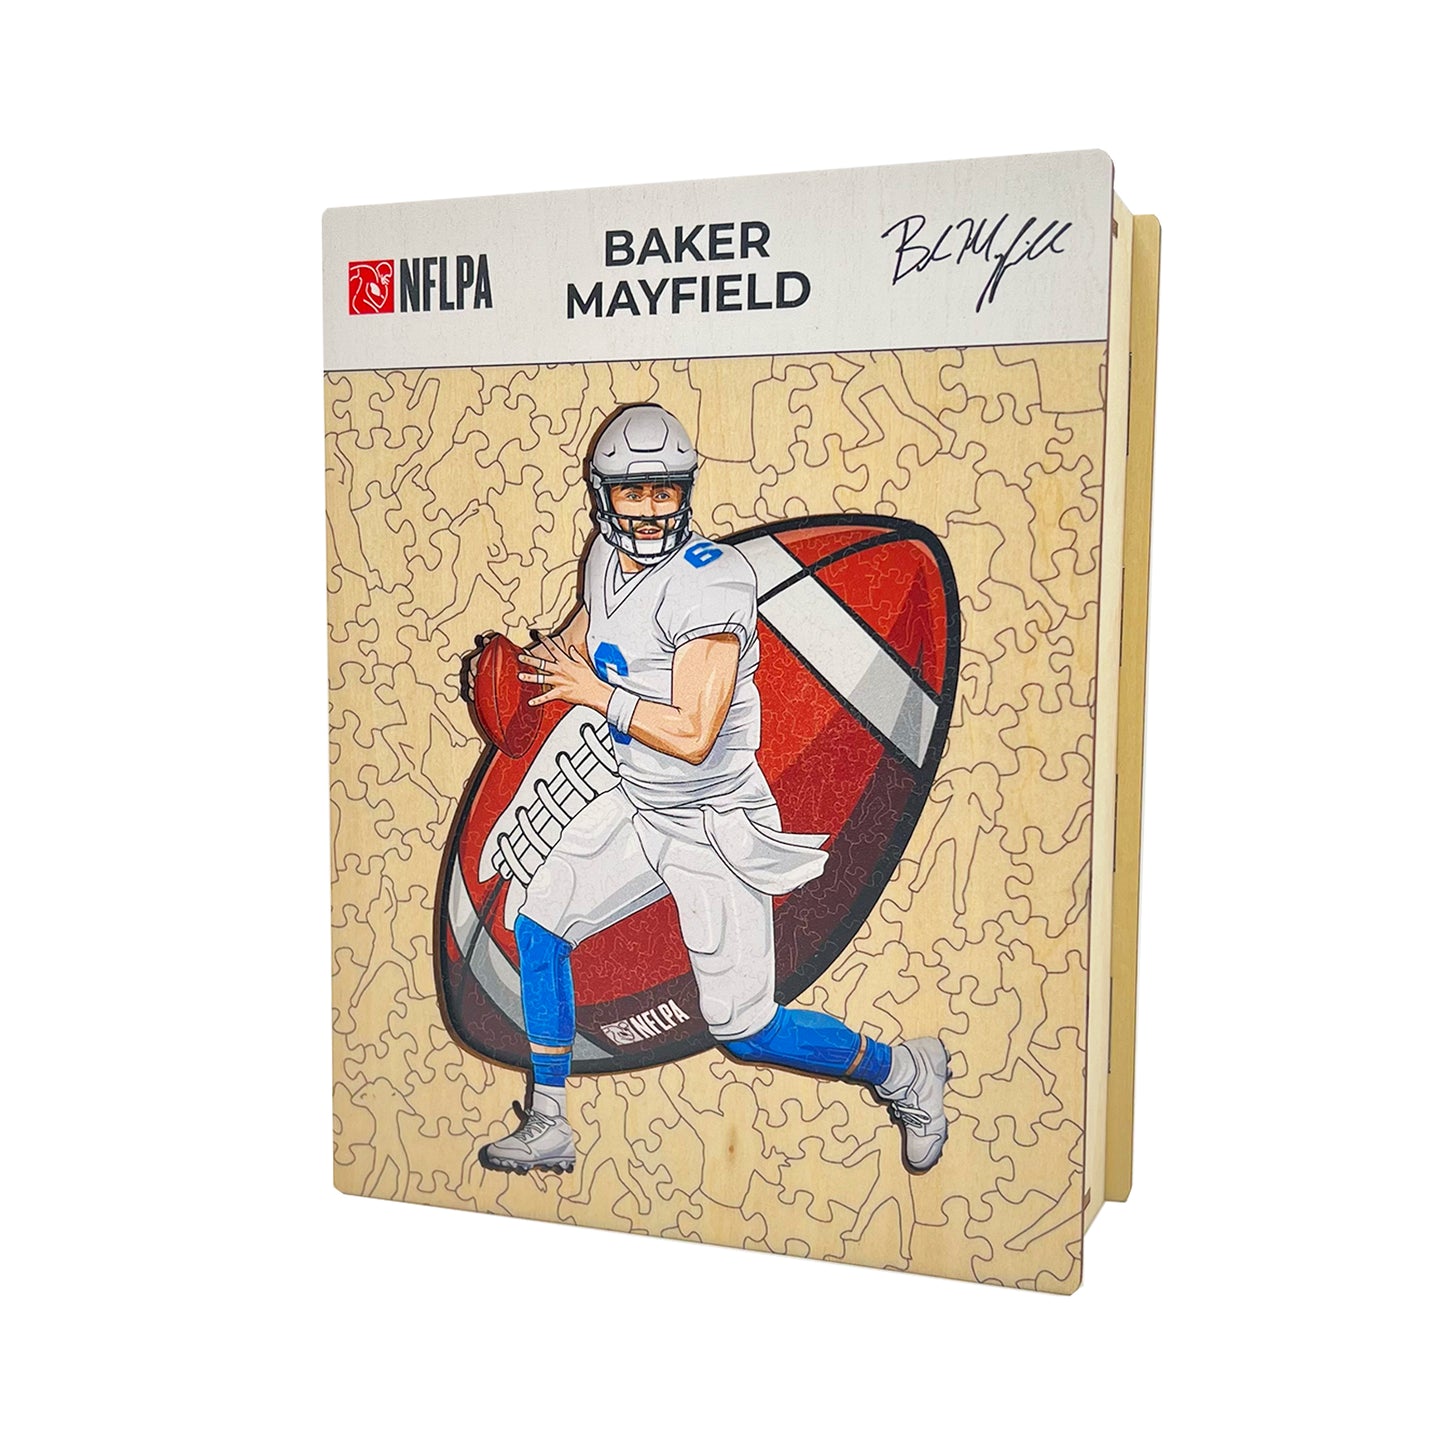 Baker Mayfield - Wooden Puzzle